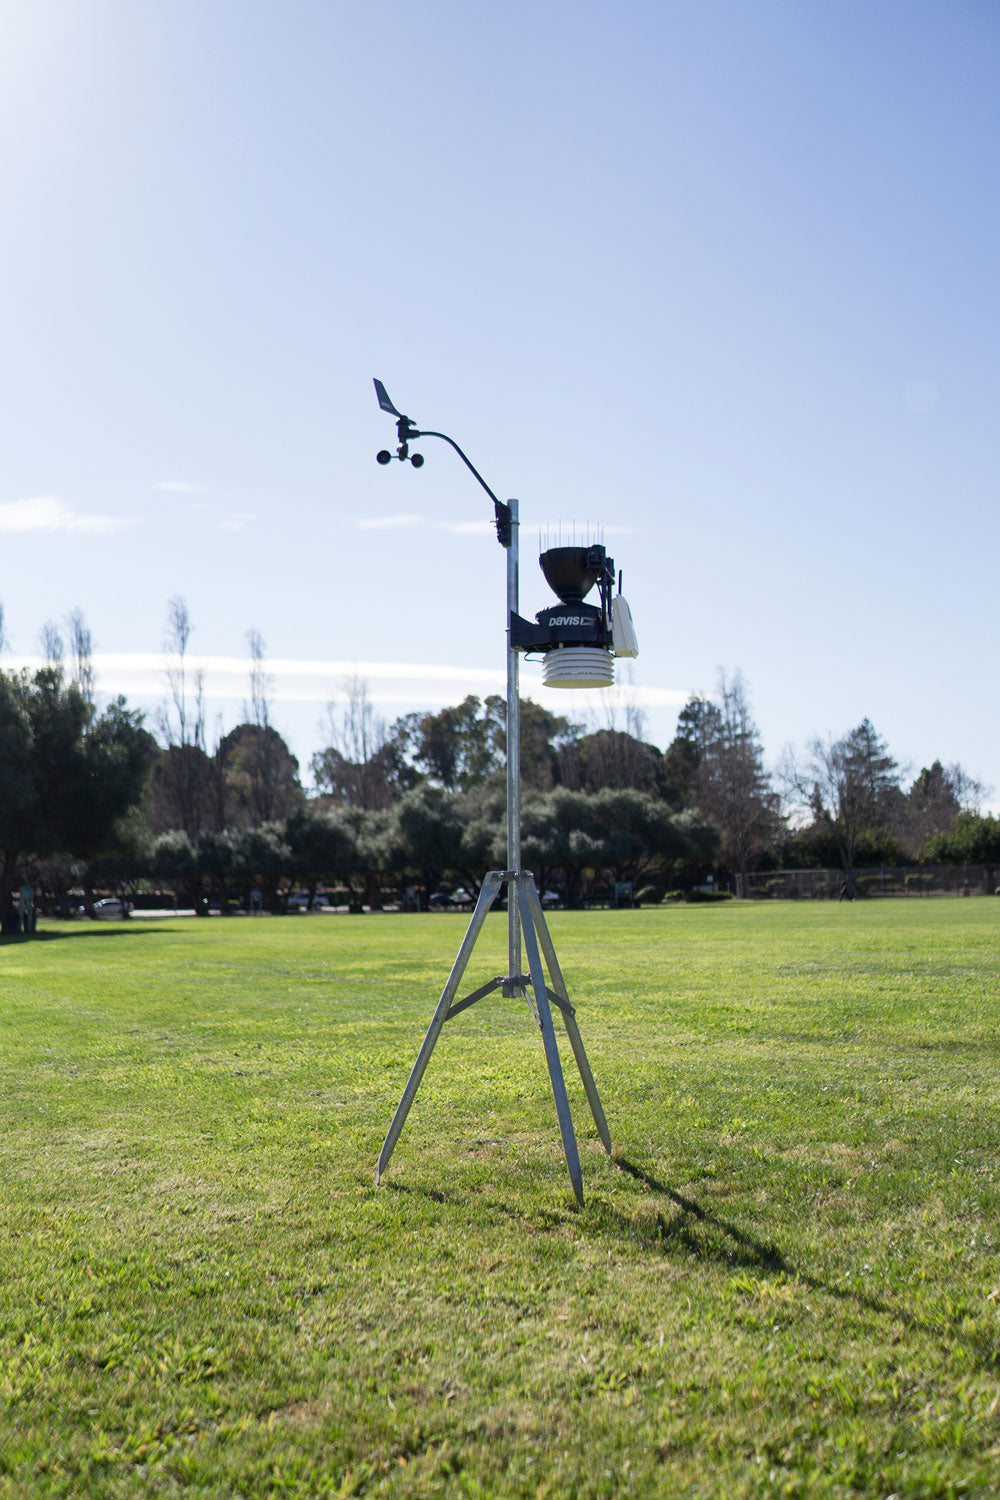 Vantage Pro2 weather station on mounting tripod in park